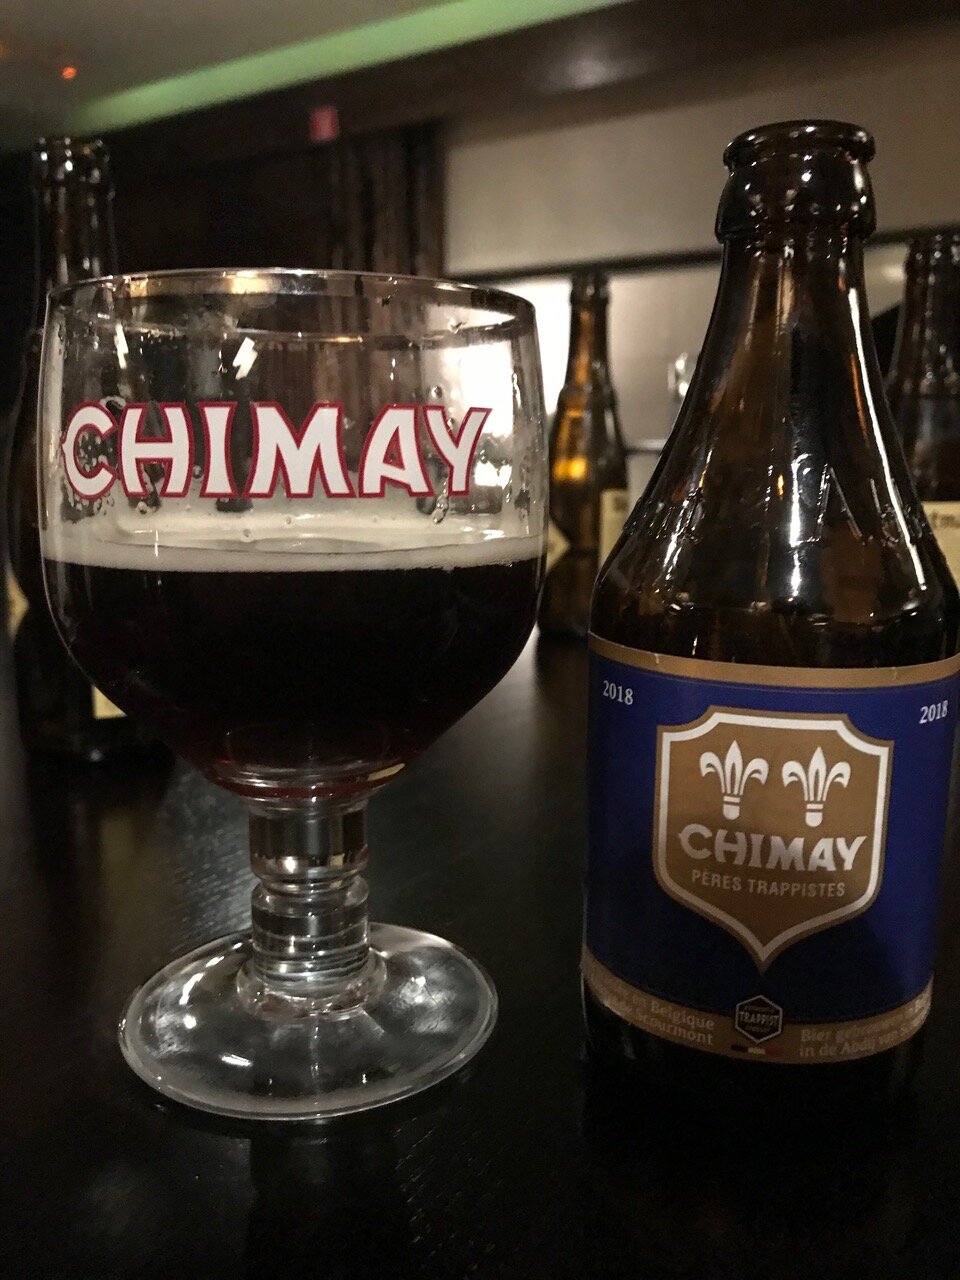 Chimay is a classic Trappist Belgian beer, and is one of the beer names that made Belgian Beer famous! If you are at a Christmas market in Belgium you must try this rich beer! 